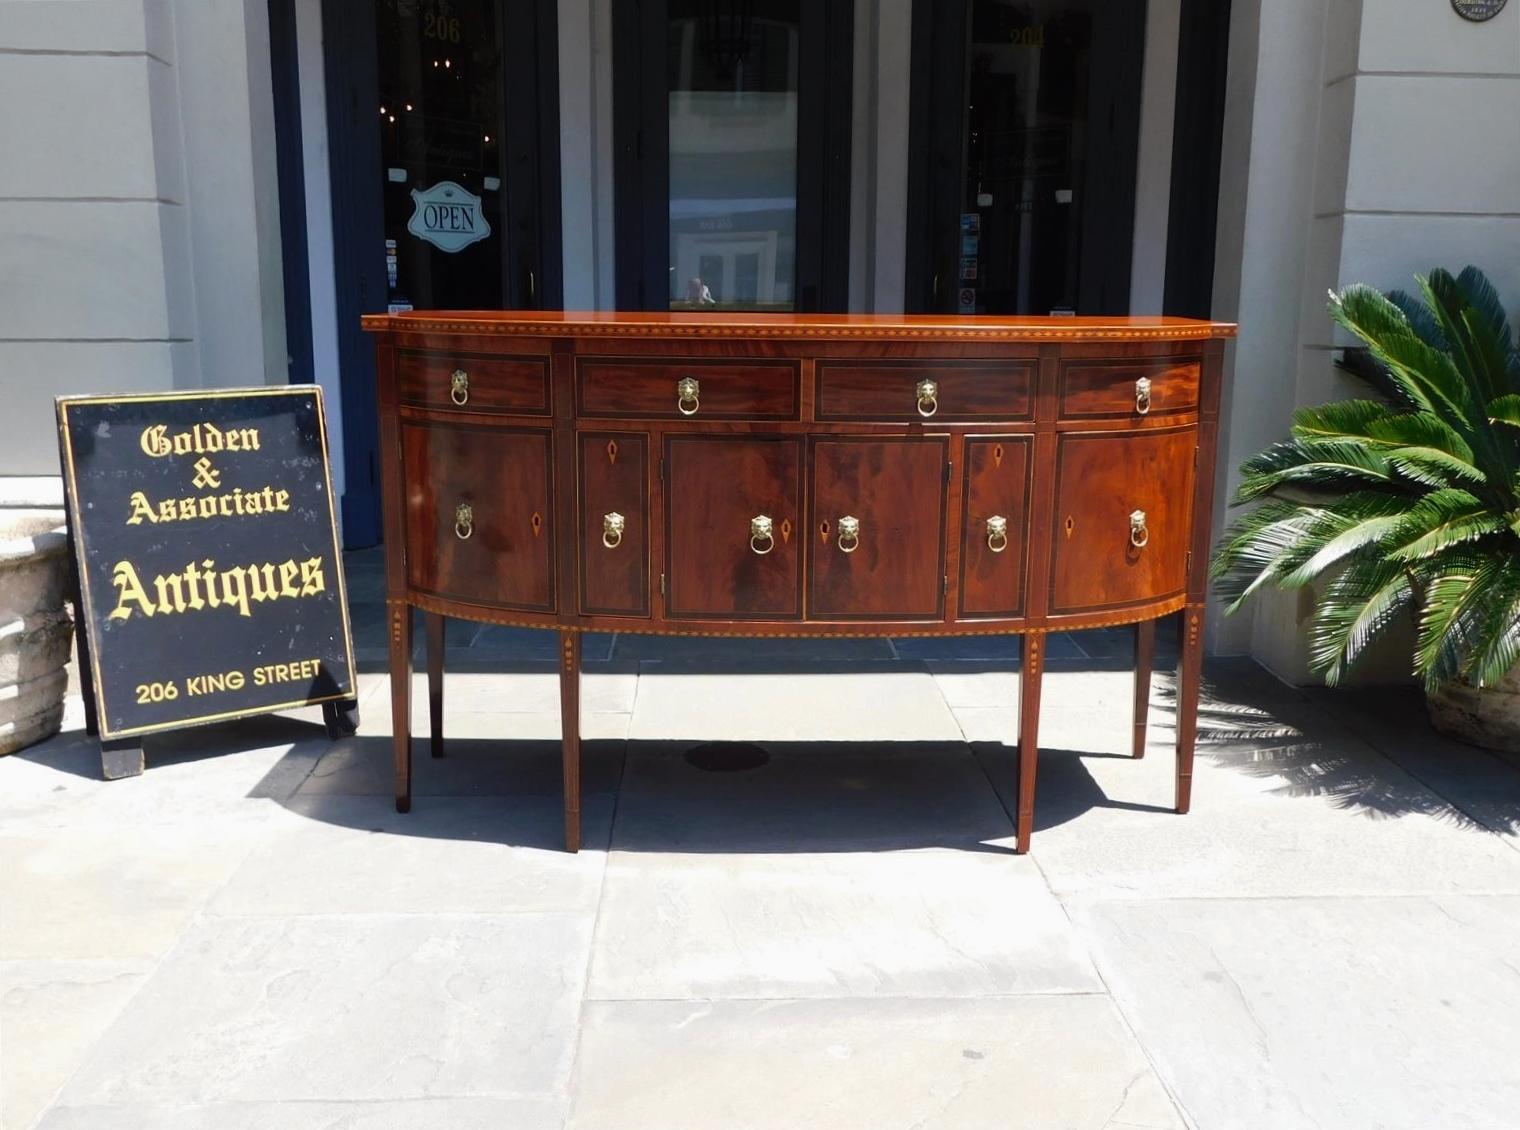 American Hepplewhite Mahogany bow front satinwood string inlaid sideboard cross banded with kings wood, lion head pull brasses, inlaid diamond escutcheons with key, three upper drawers, central hinged cabinet doors flanked by cellarette divider